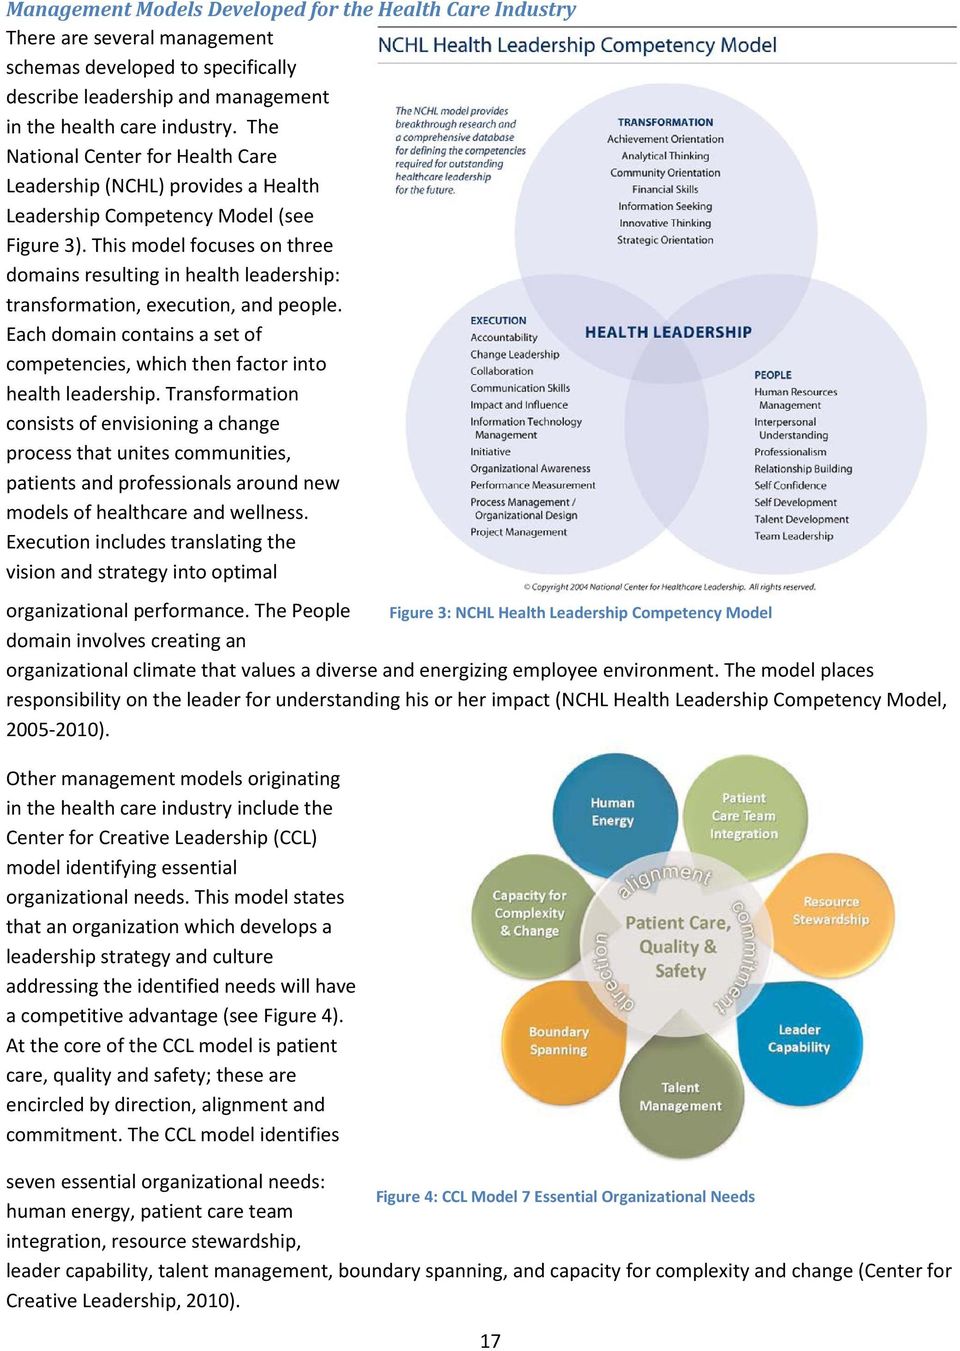 This model focuses on three domains resulting in health leadership: transformation, execution, and people. Each domain contains a set of competencies, which then factor into health leadership.